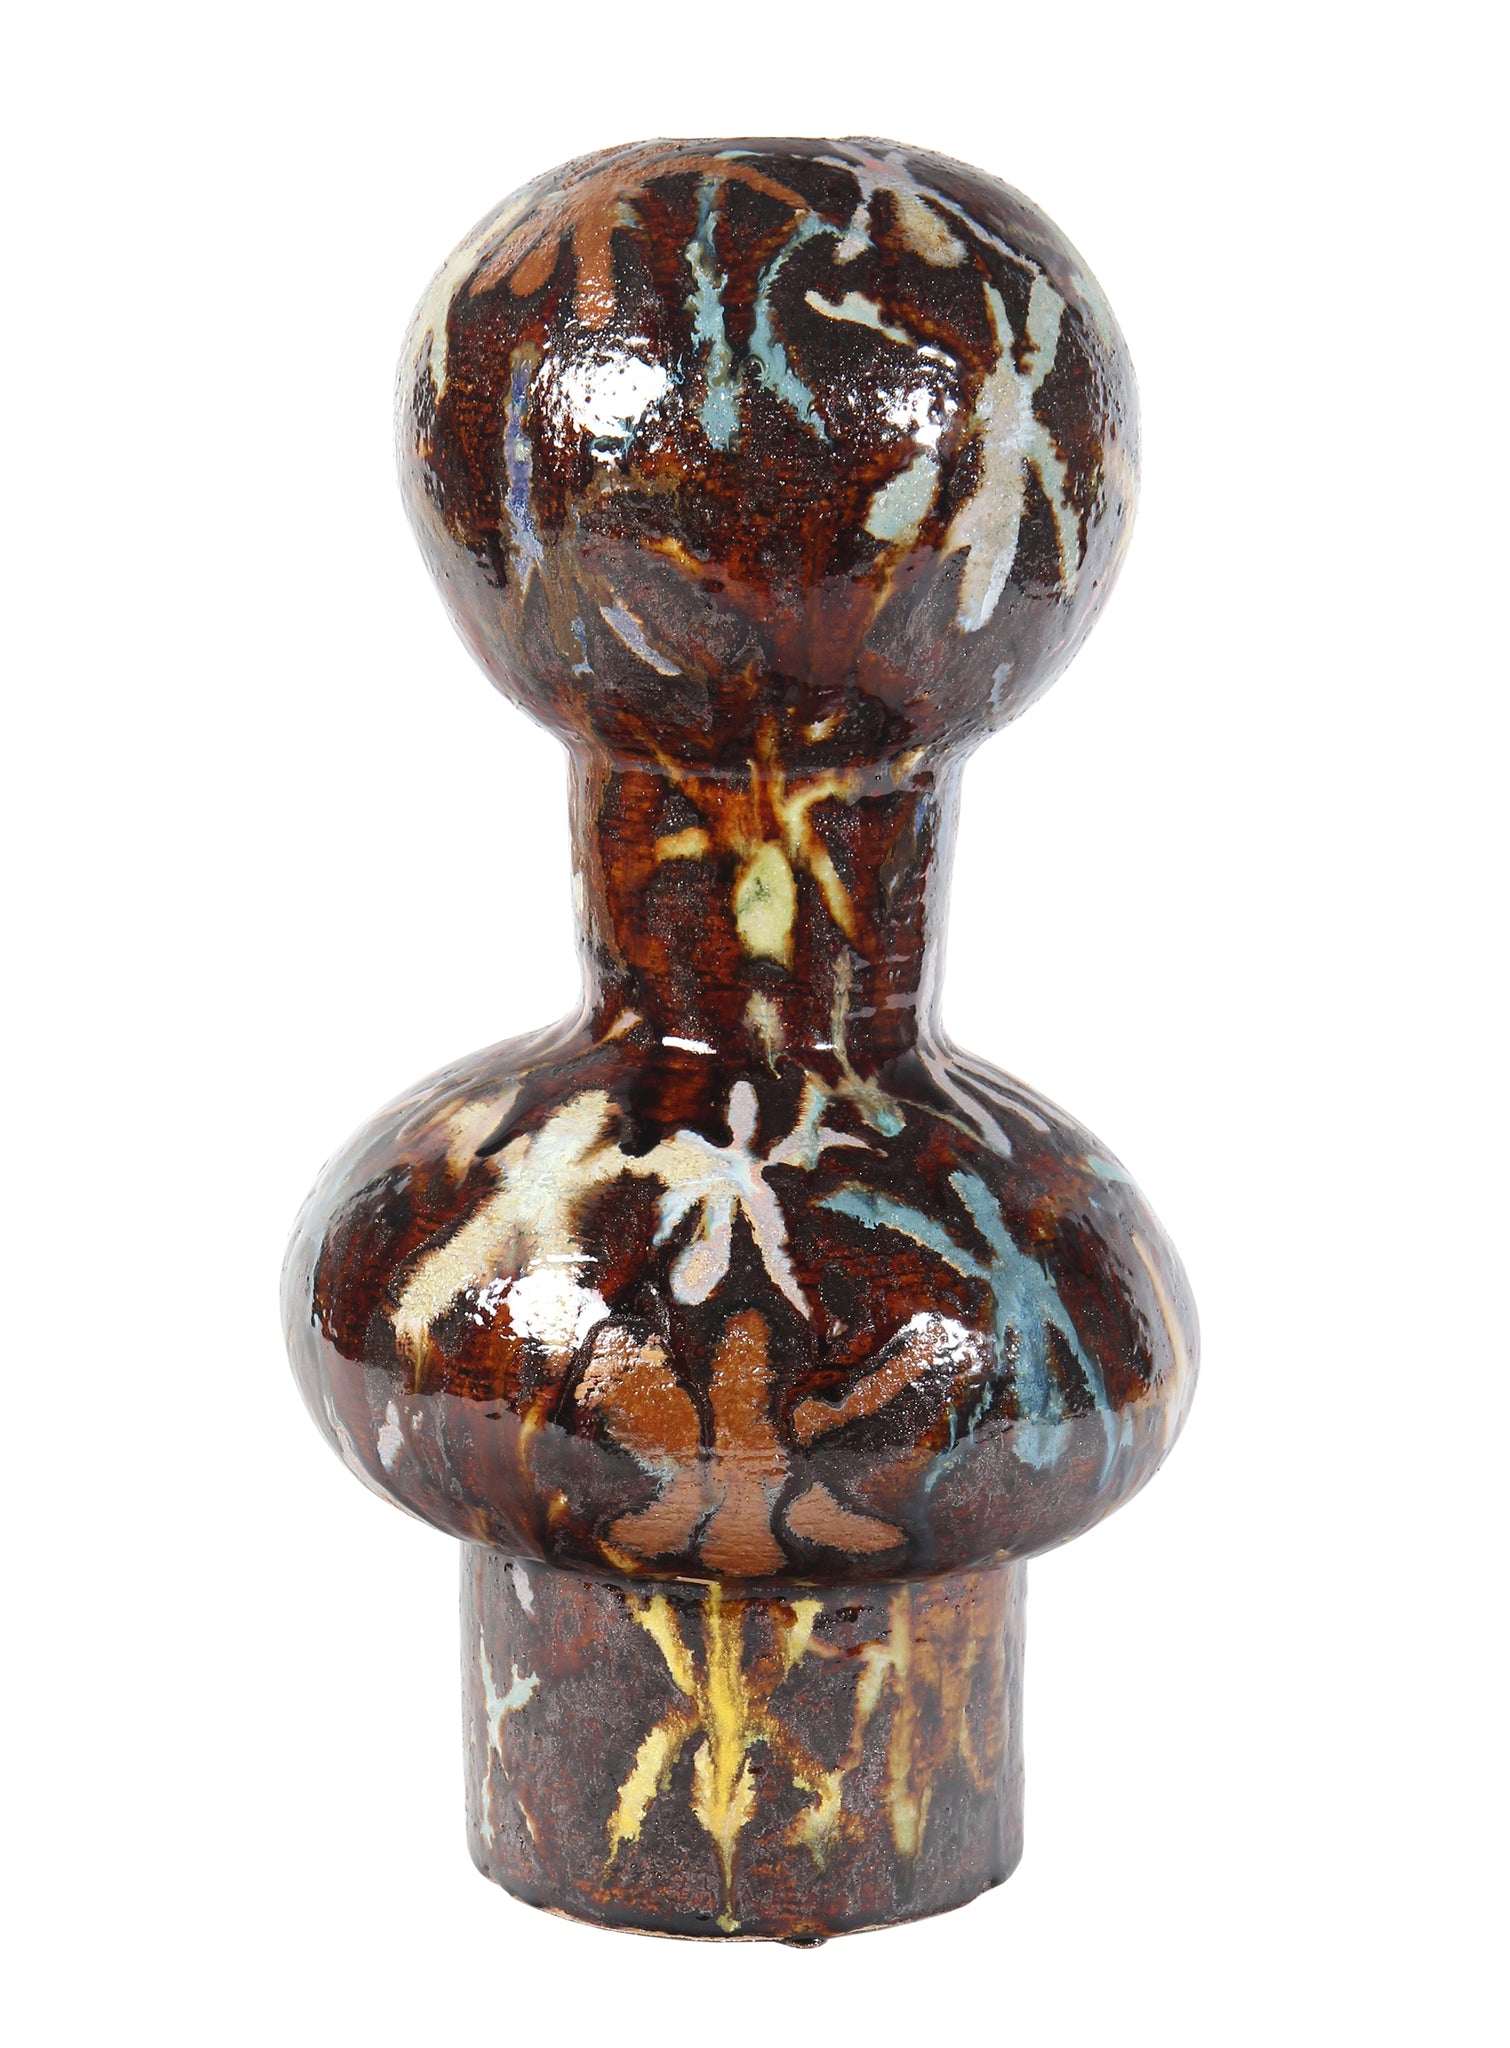 Orchid Vase Made by Ester Kislin in New York.